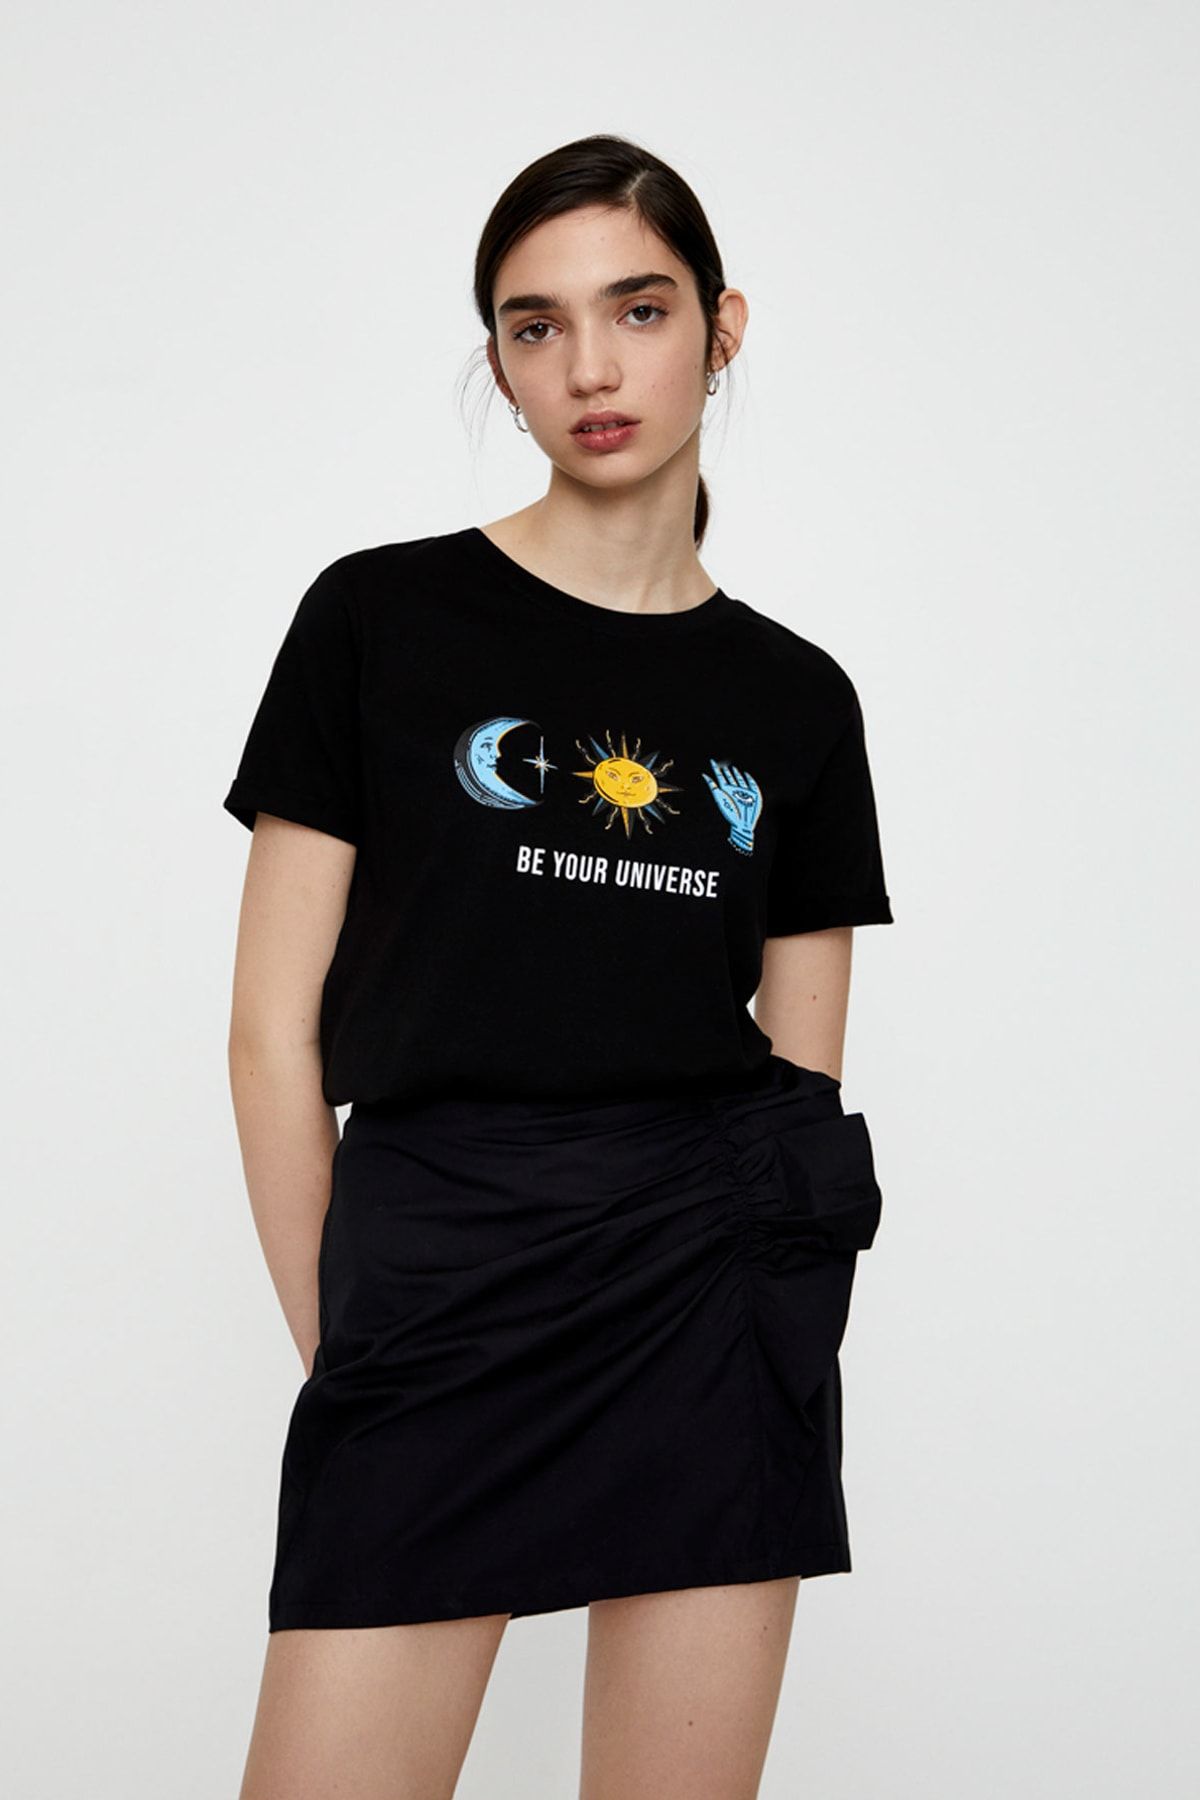 Pull & Bear “Be Your Universe” Görselli T-Shirt